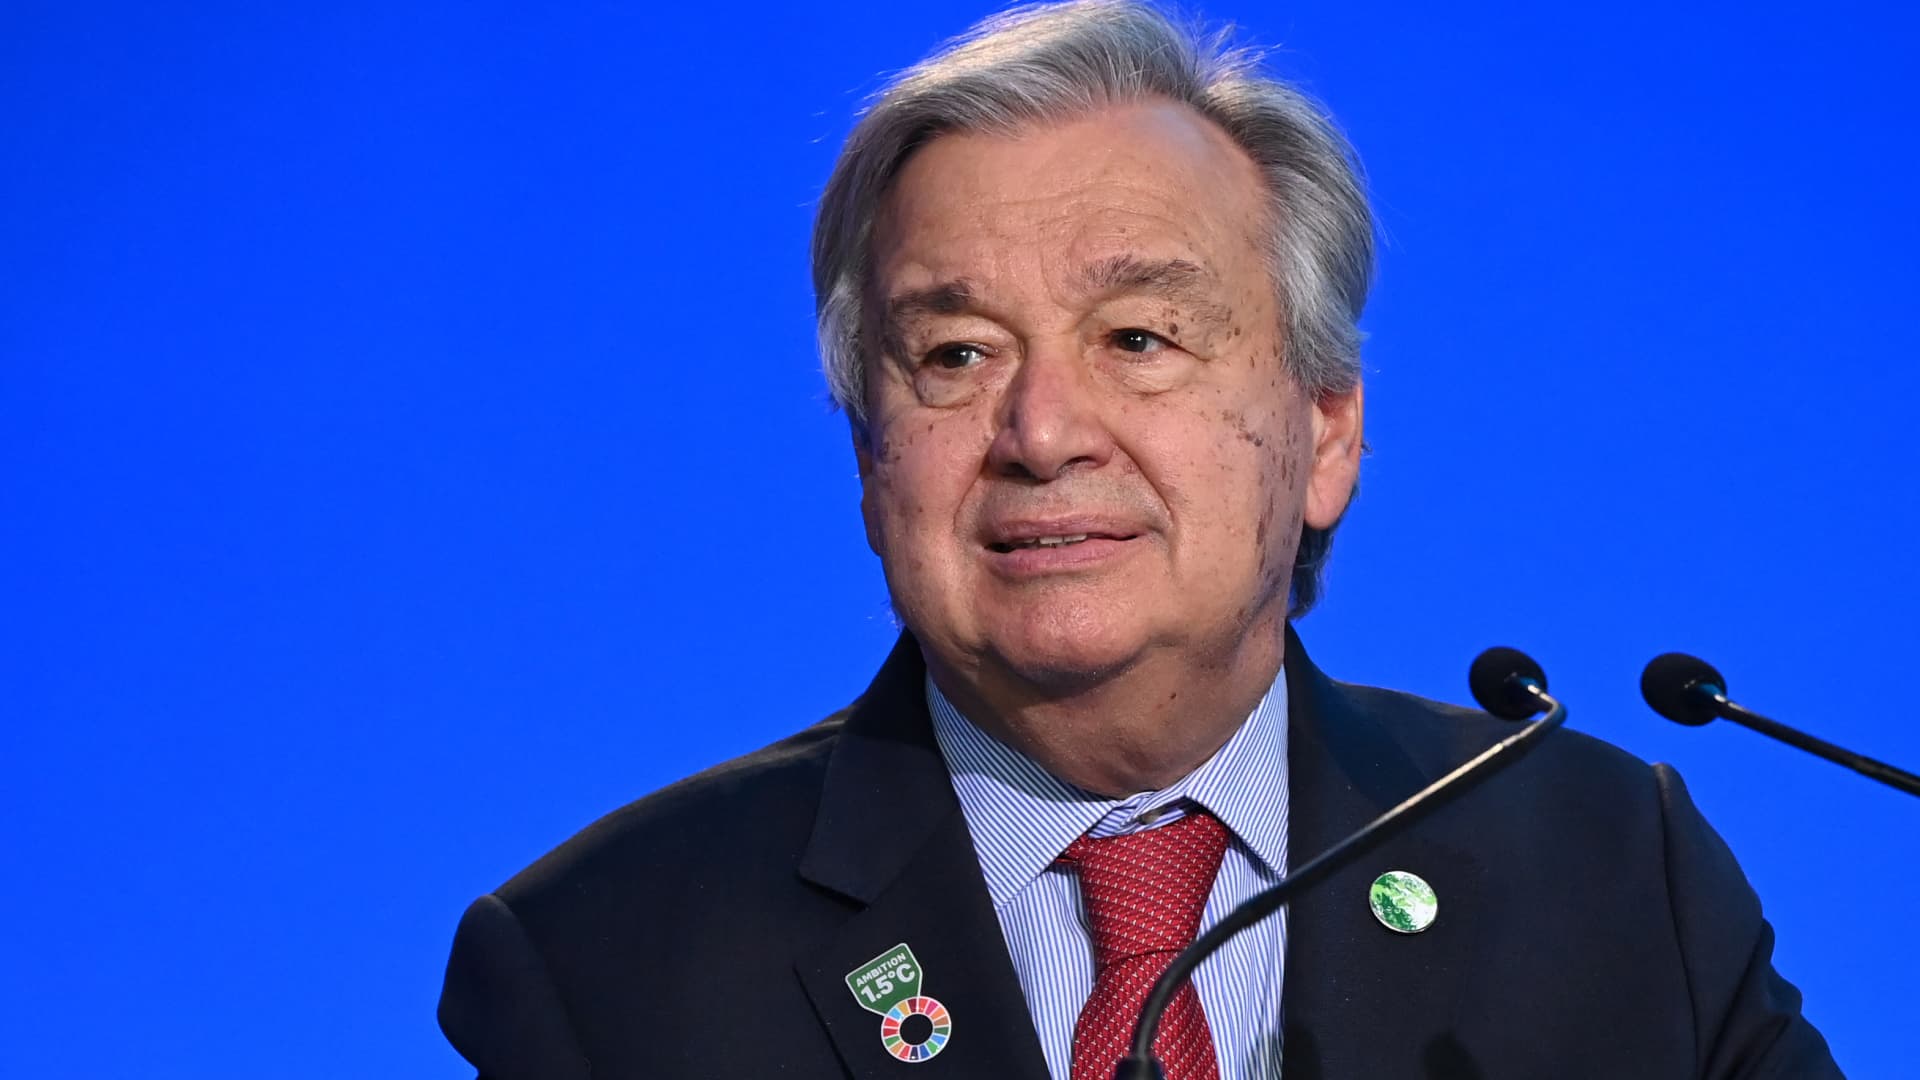 UN Secretary General António Guterres photographed at the COP26 climate summit in Glasgow, Scotland on Nov. 11, 2021.